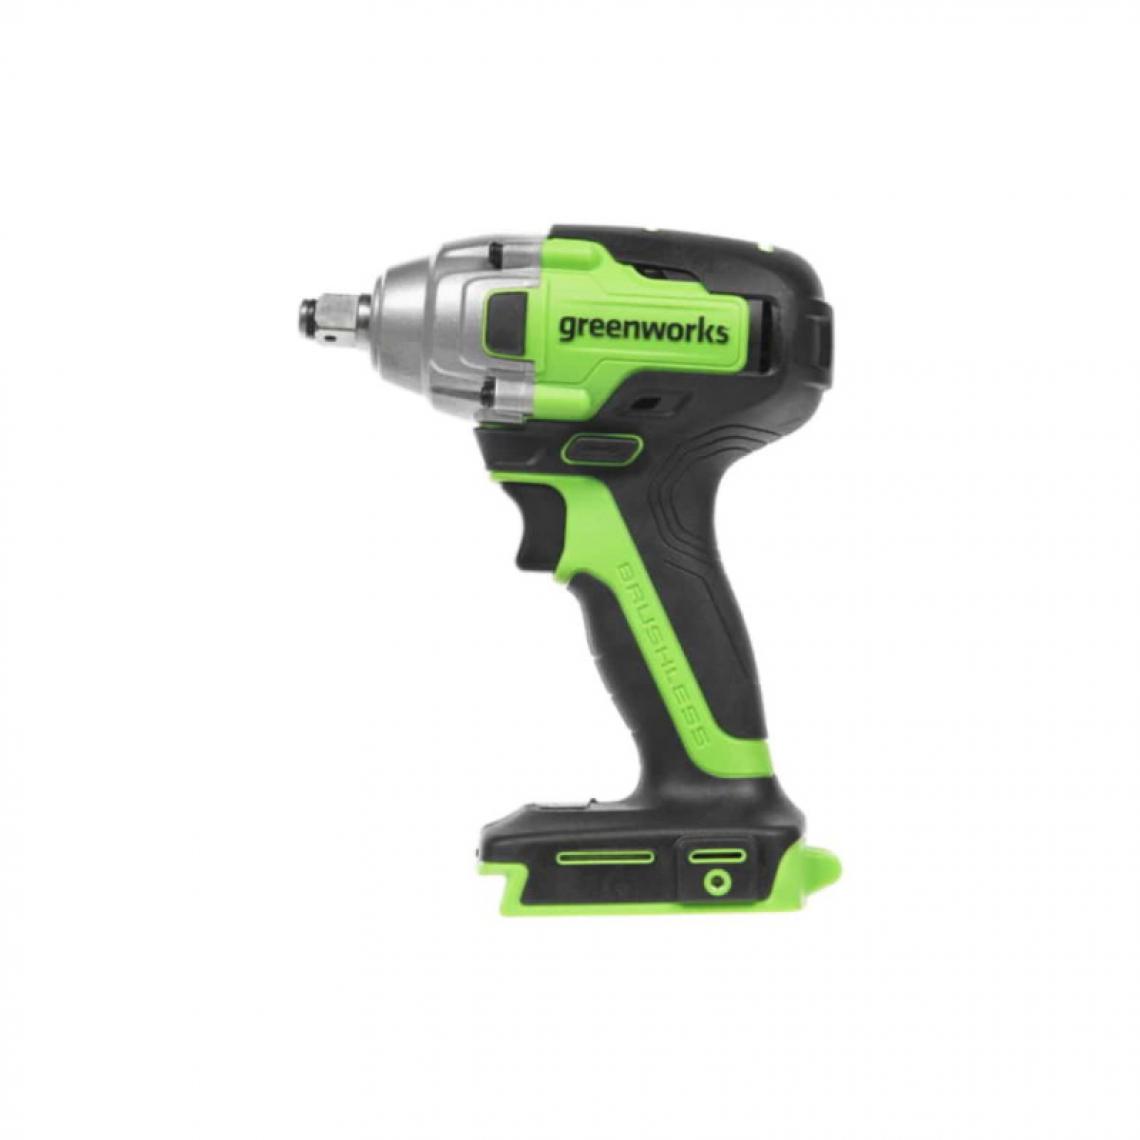 Greenworks - Boulonneuse à chocs GREENWORKS 24V Brushless - Sans batterie ni chargeur - GD24IW400 - Boulonneuse